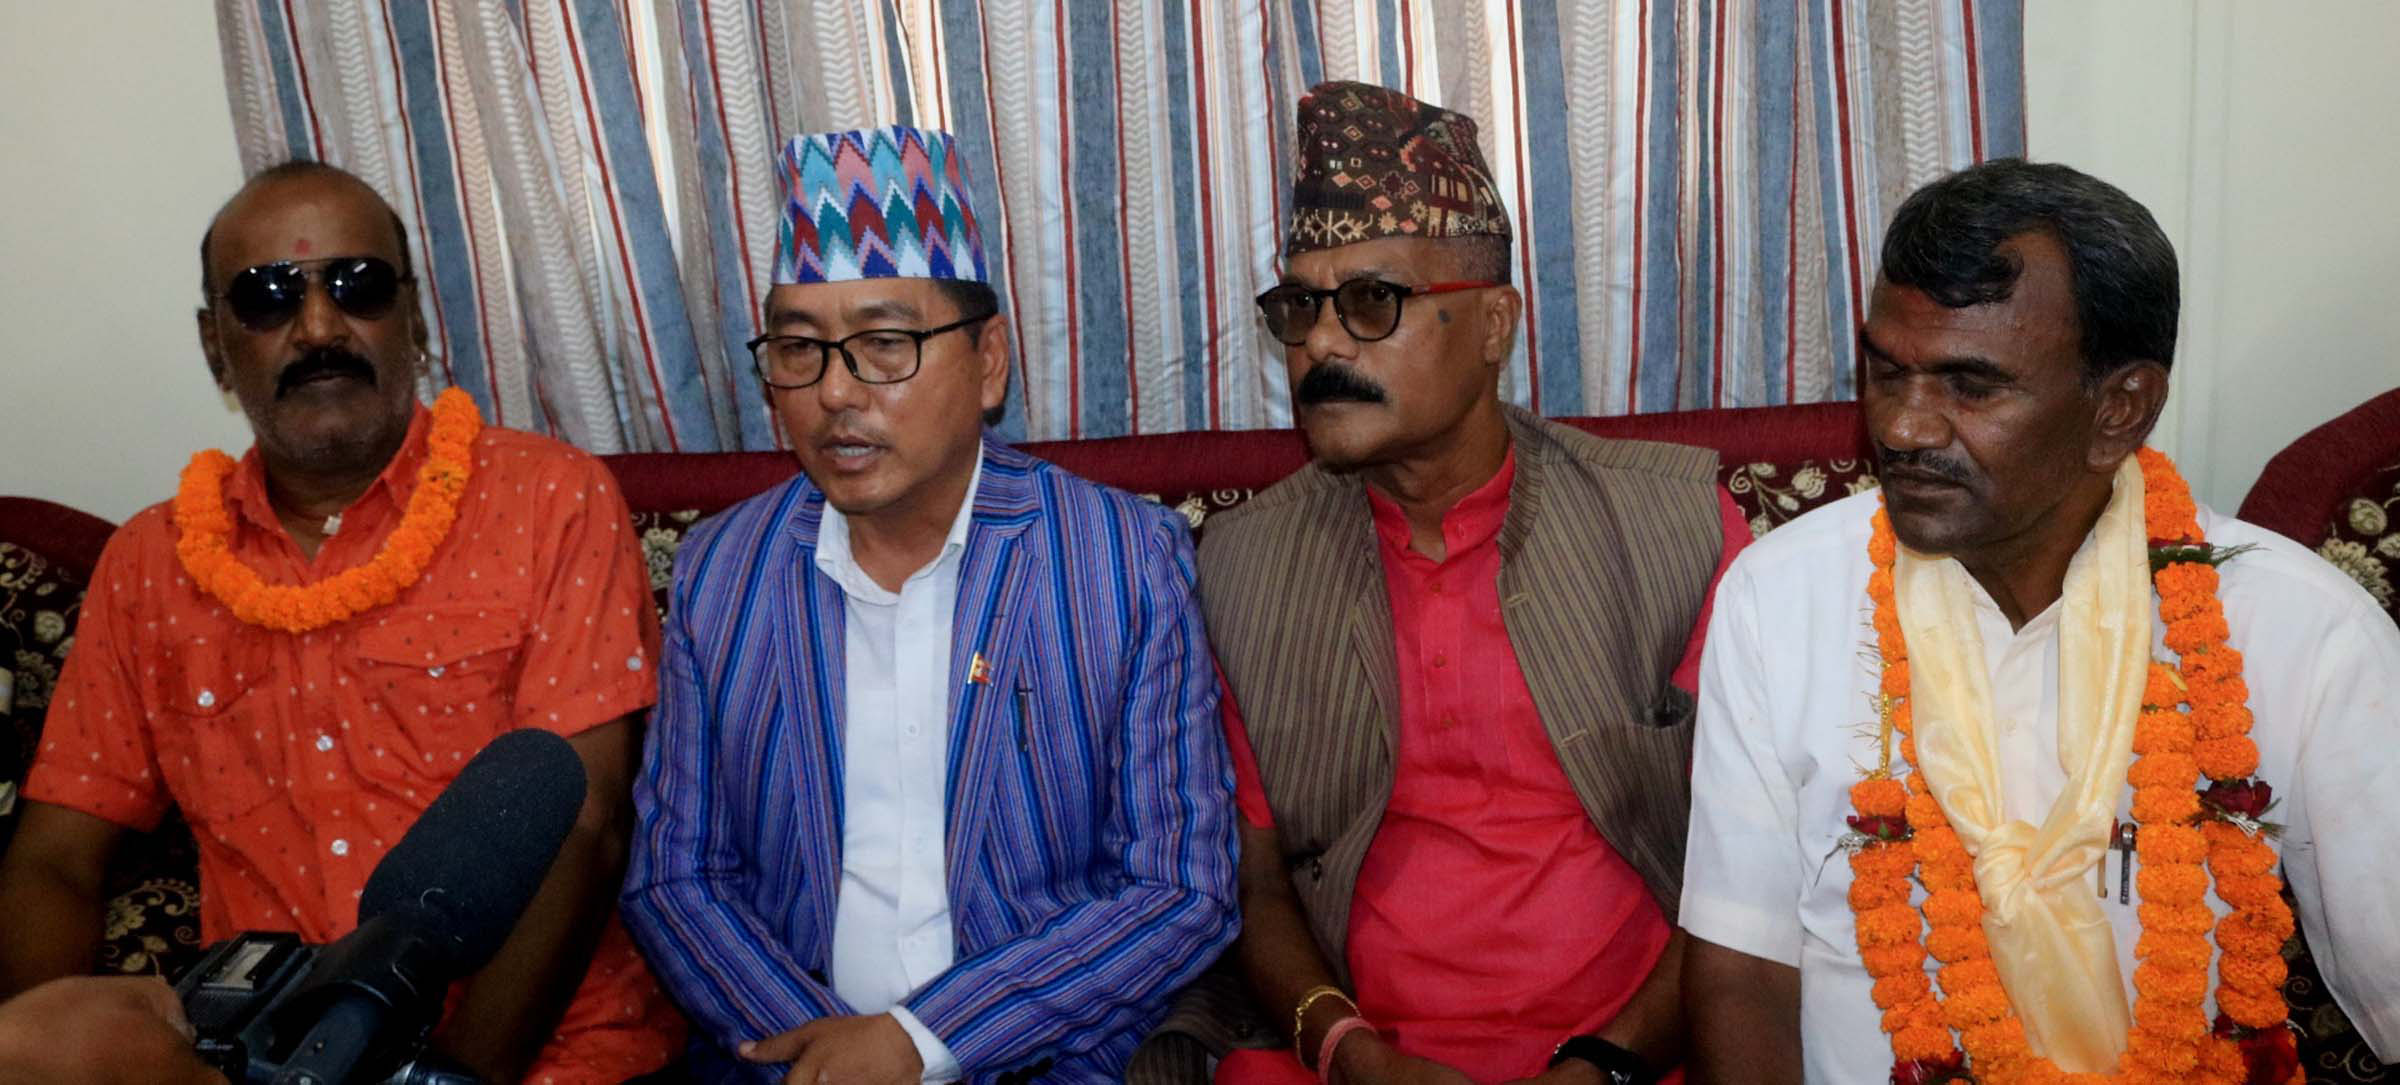 RPP contested sans alliance in local election: Rajendra Lingden